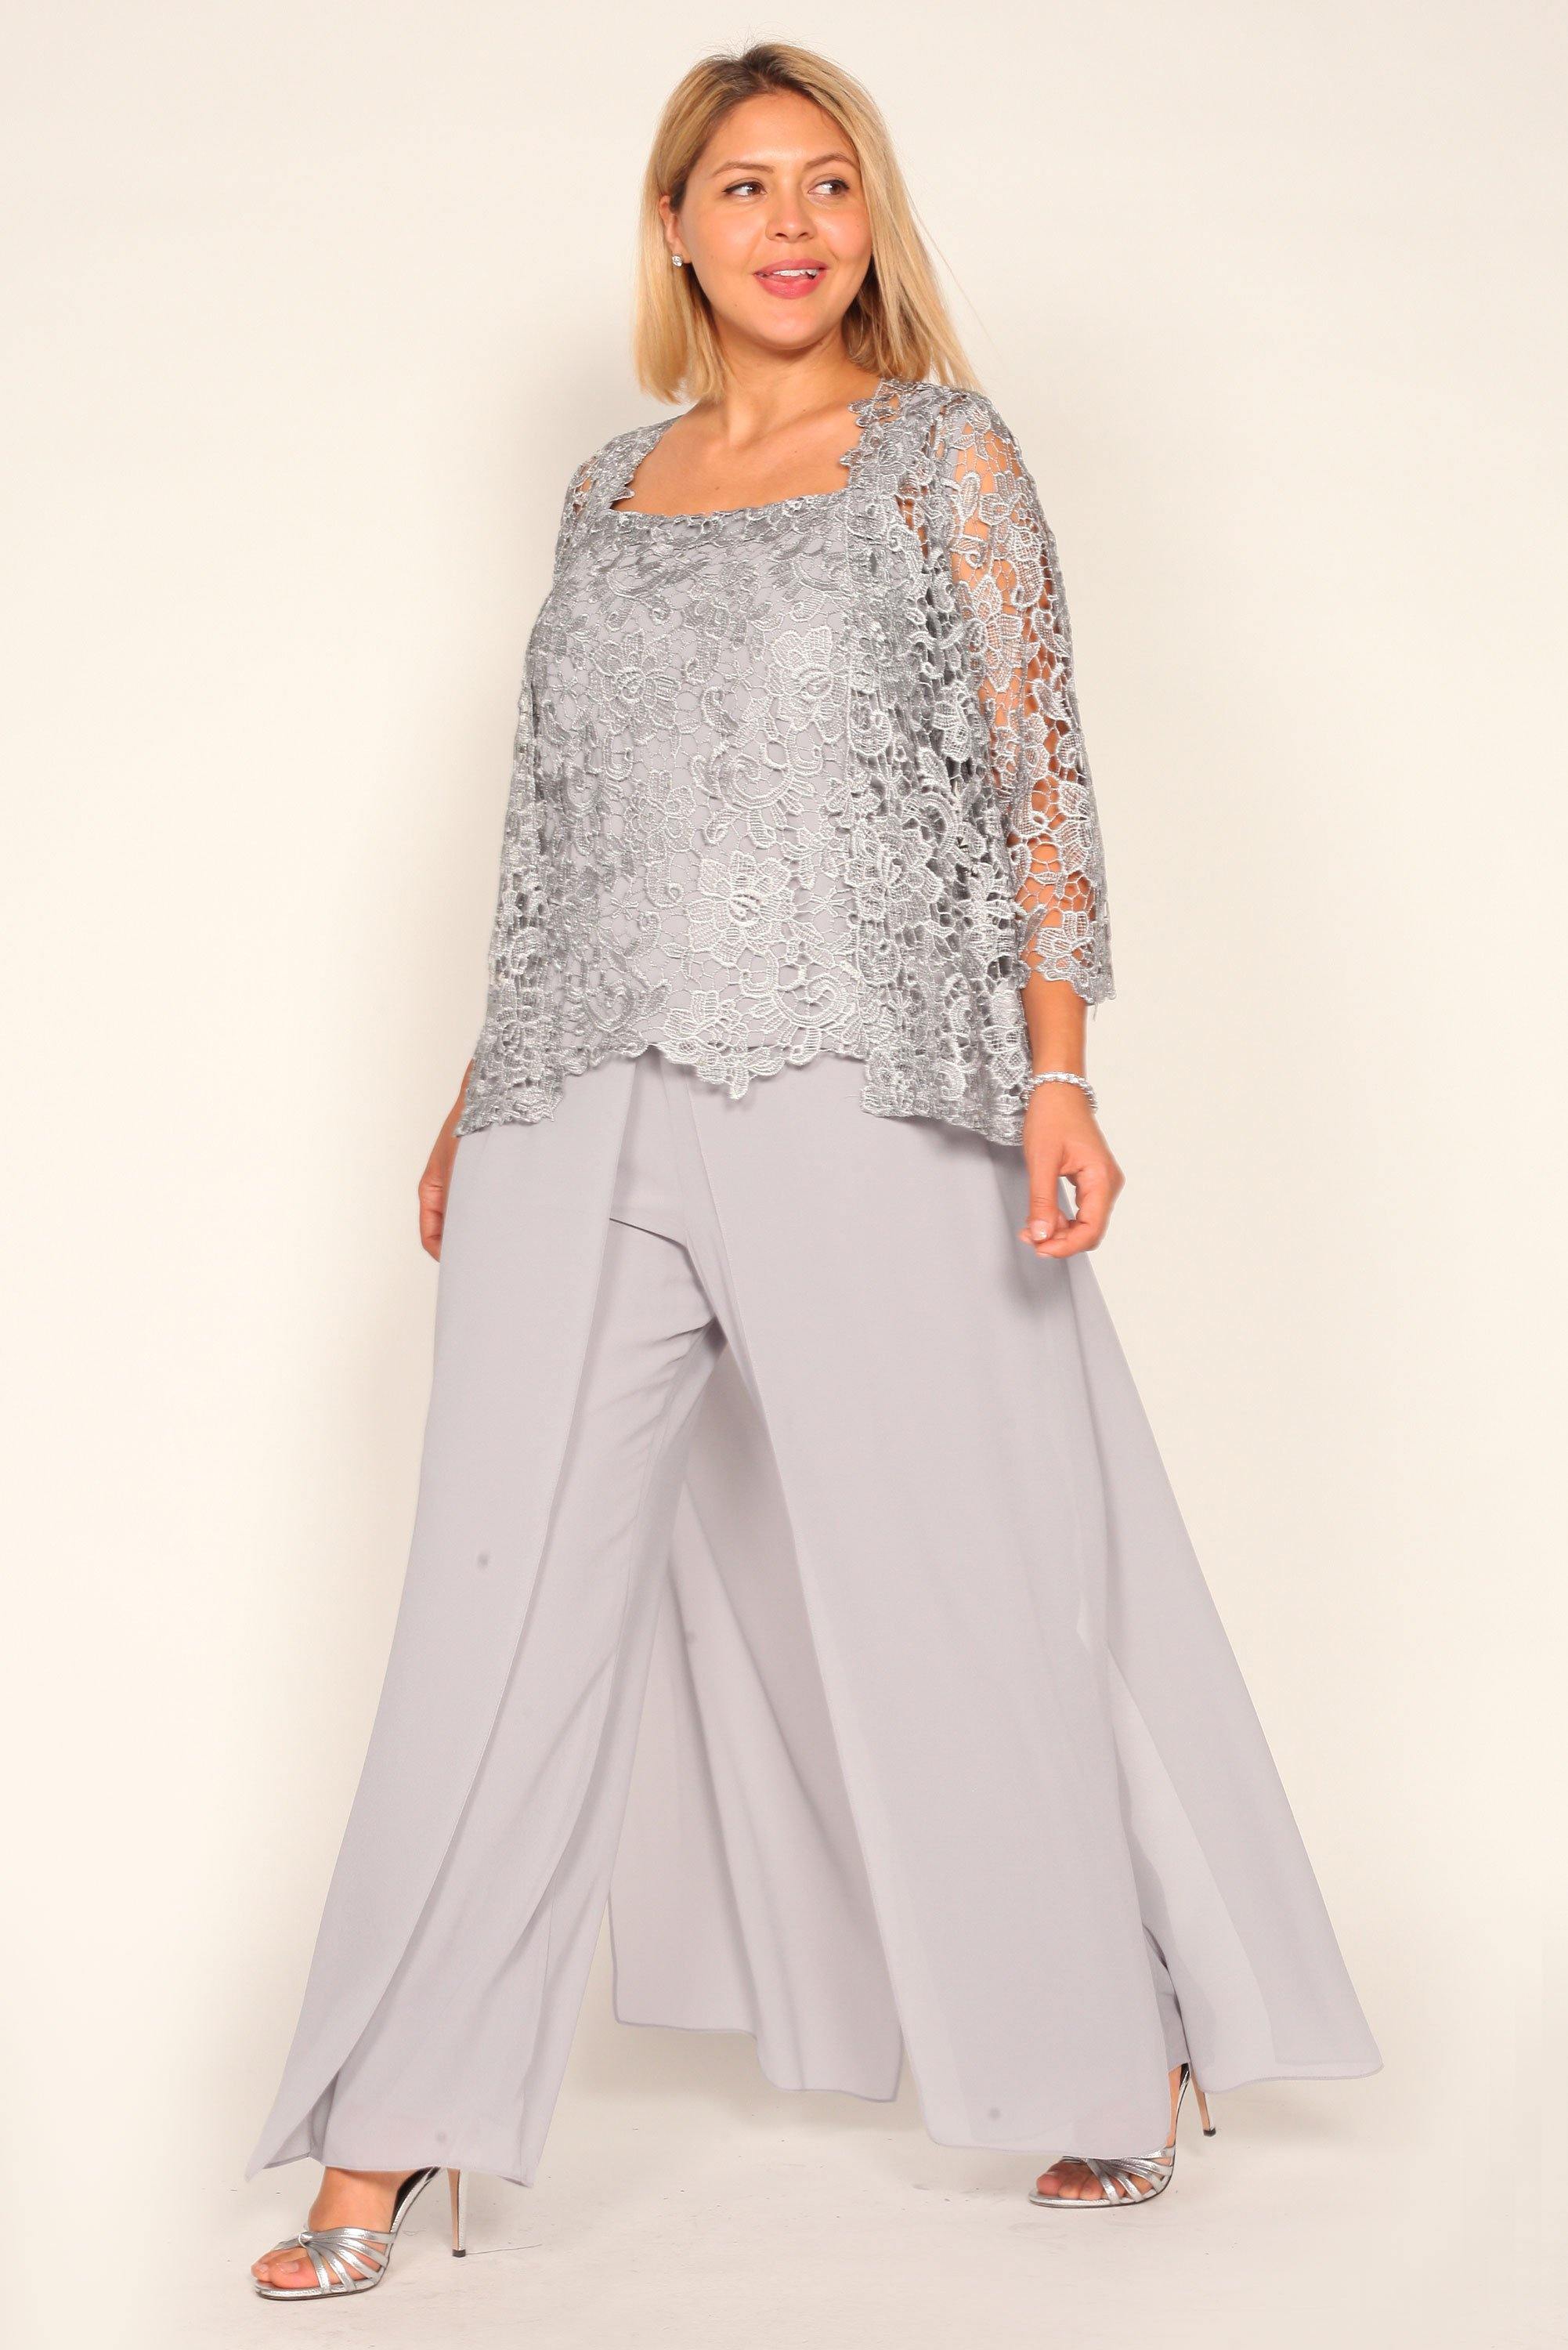 Silver Mother of the Bride Pant Suit for $129.99, – The Dress Outlet